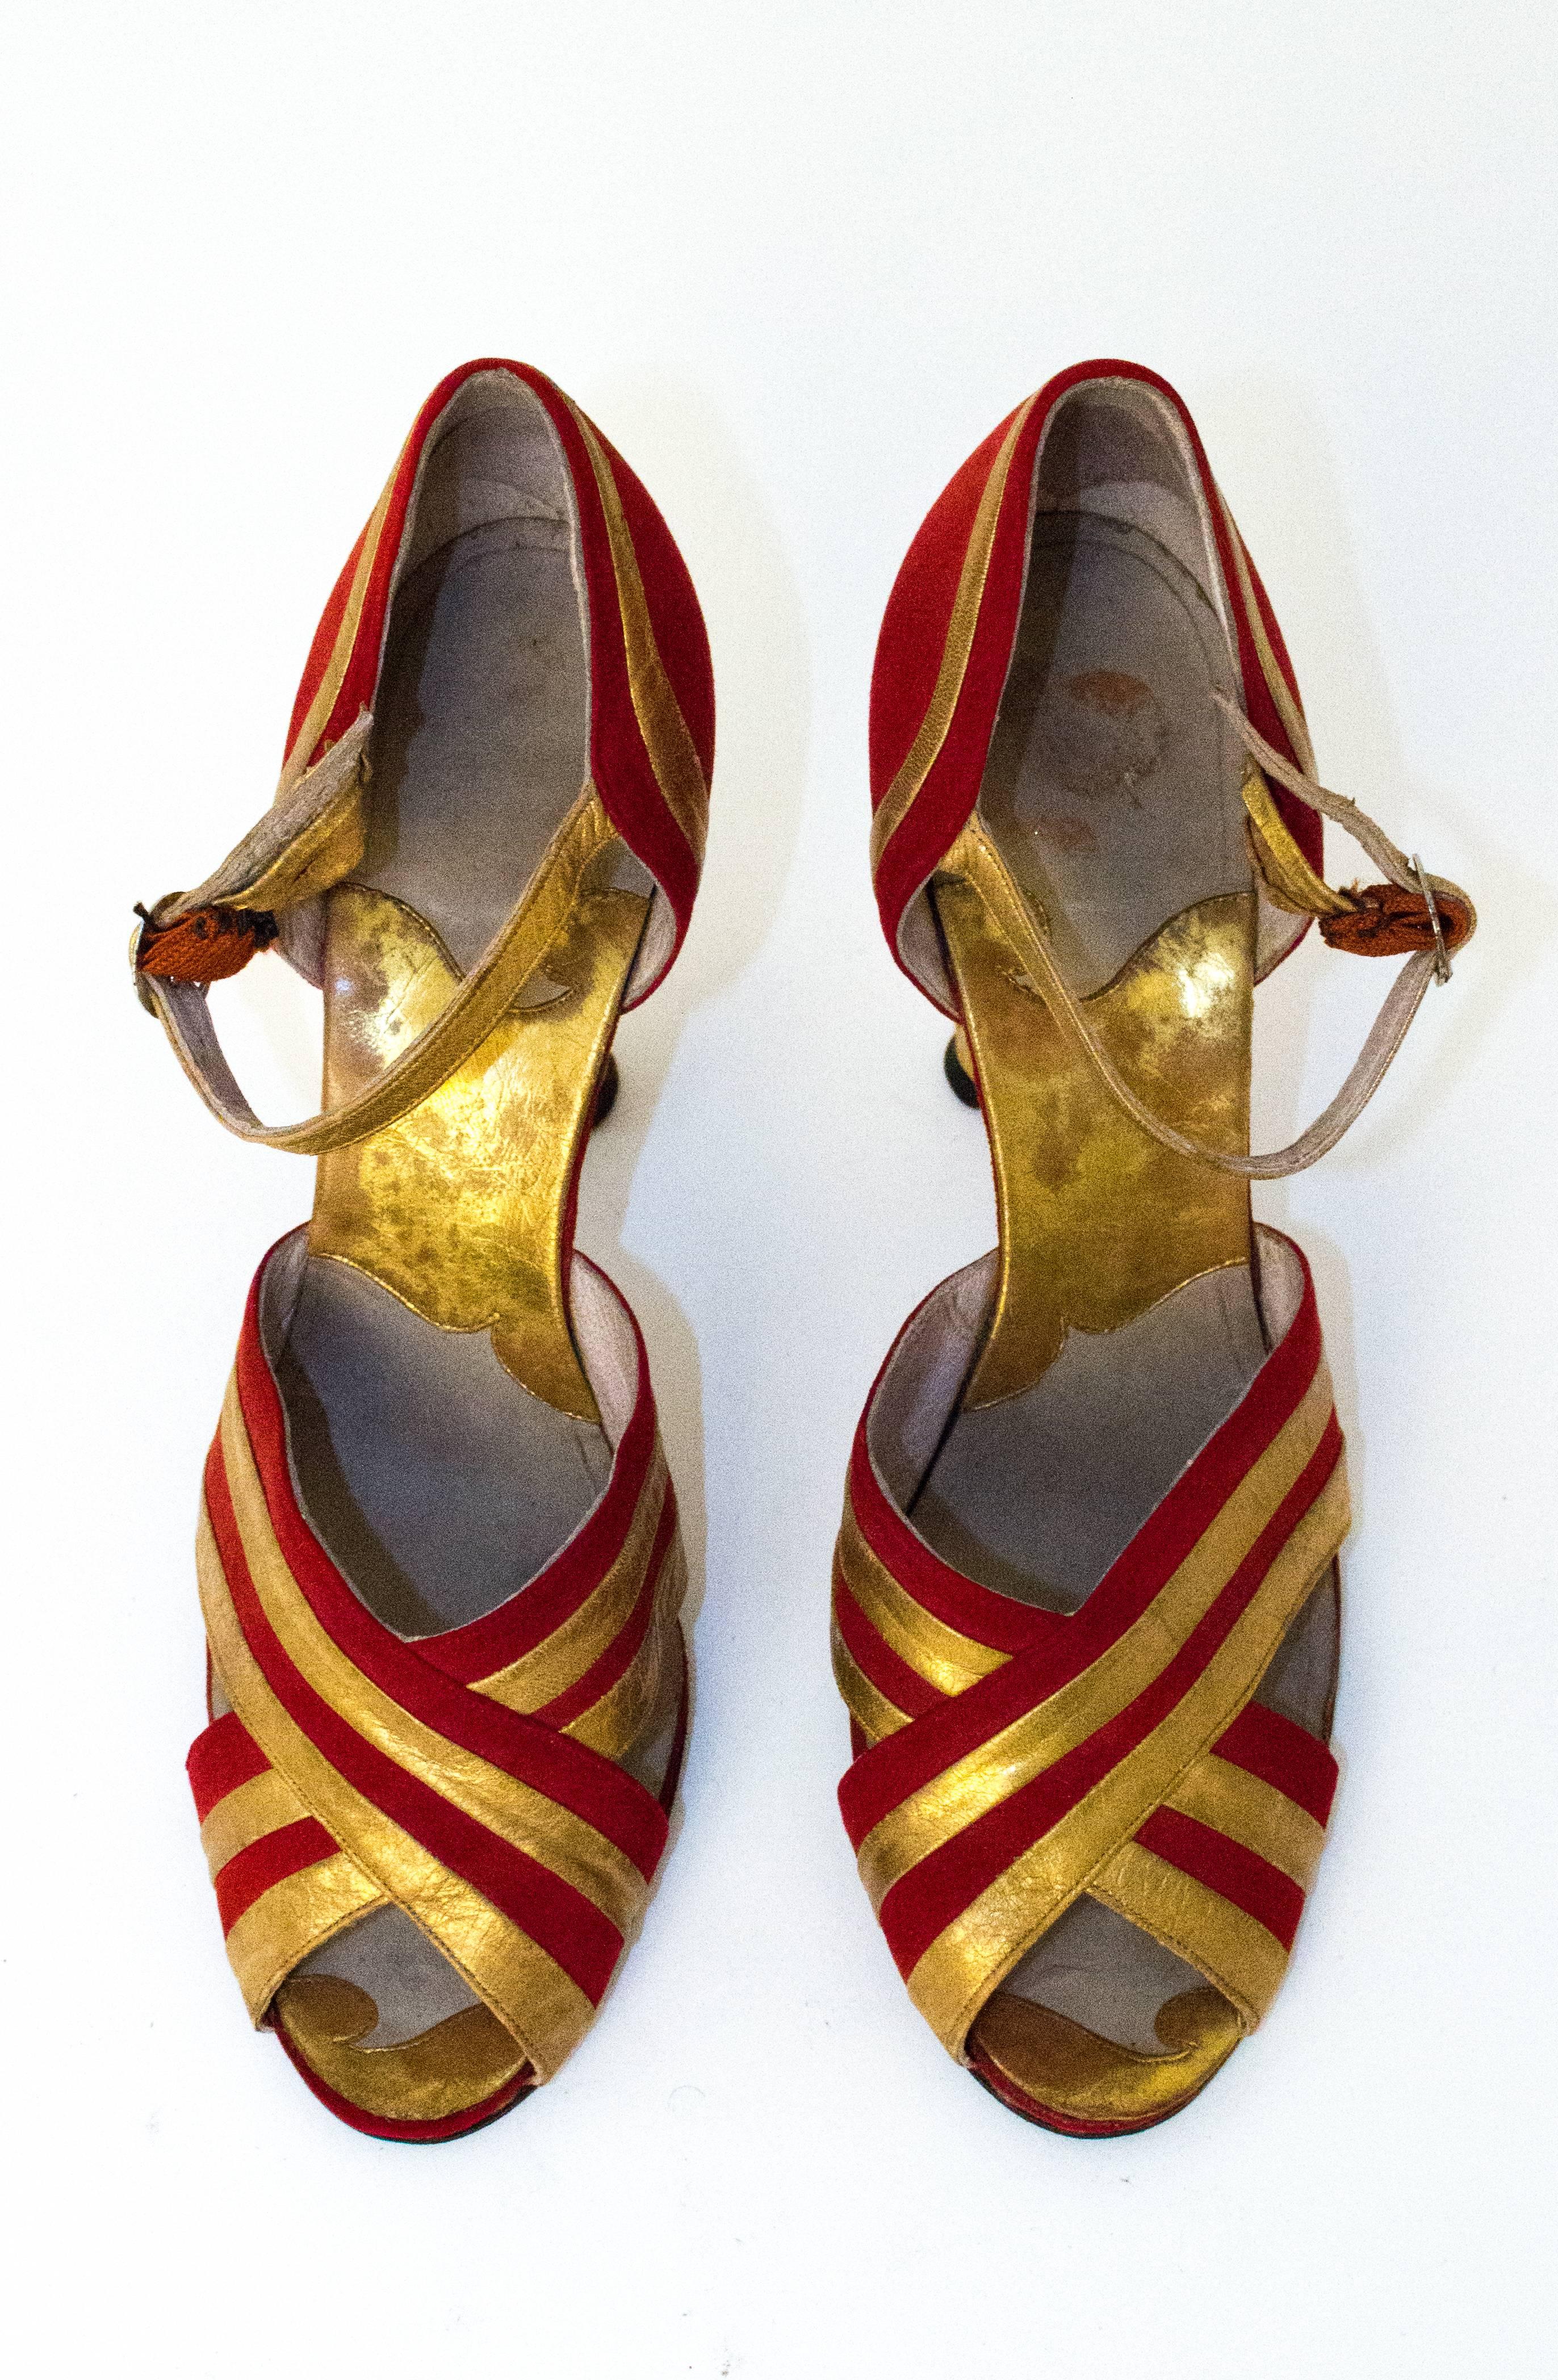 30s Red and Gold Heel. Measures 9 inches from toe to heel.